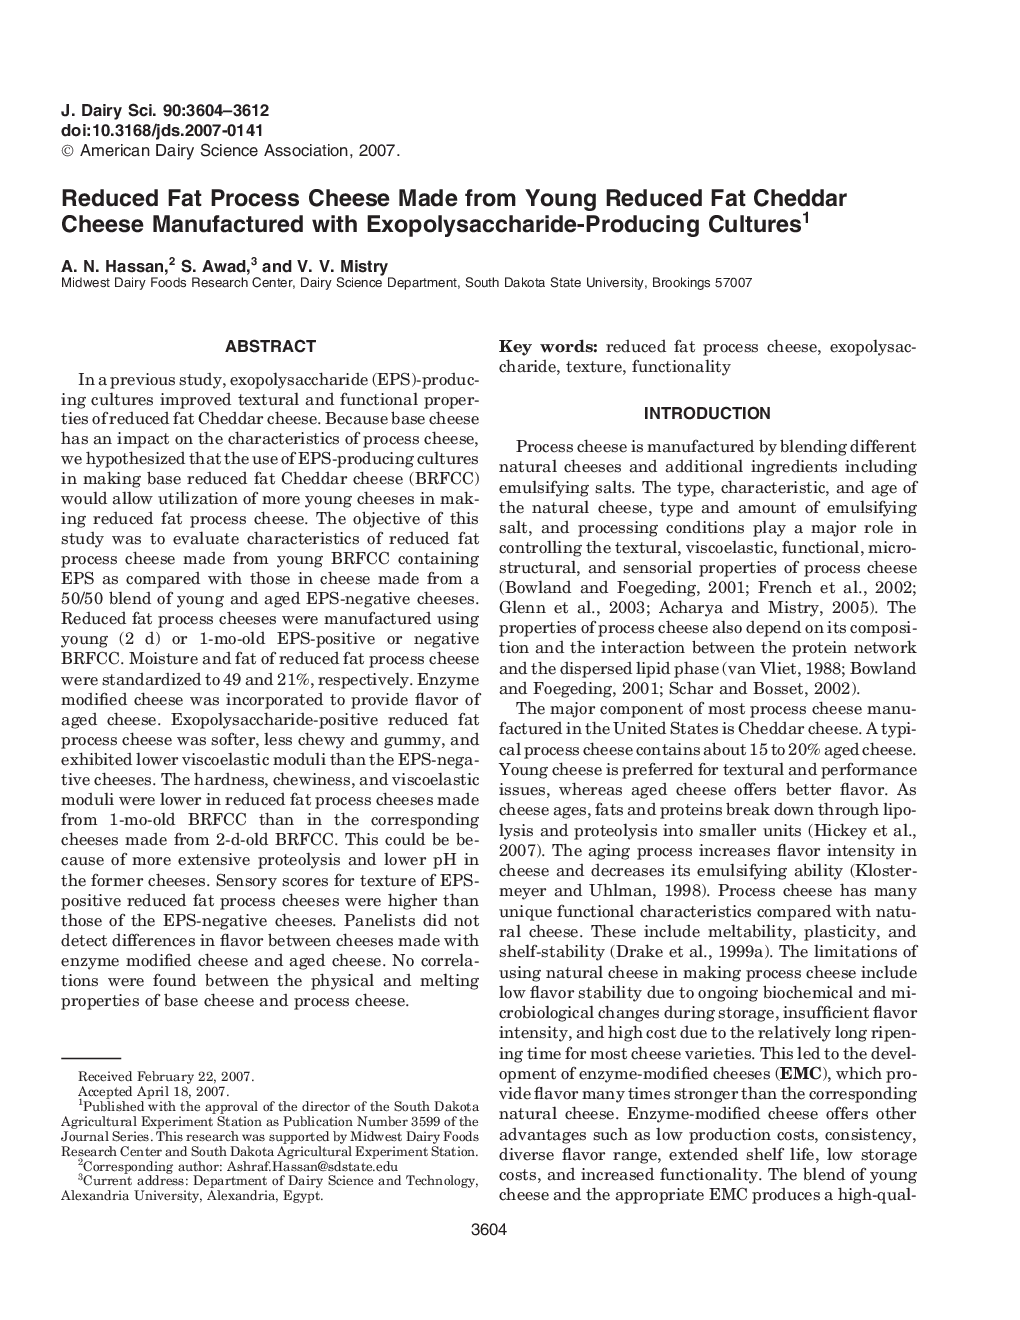 Reduced Fat Process Cheese Made from Young Reduced Fat Cheddar Cheese Manufactured with Exopolysaccharide-Producing Cultures1